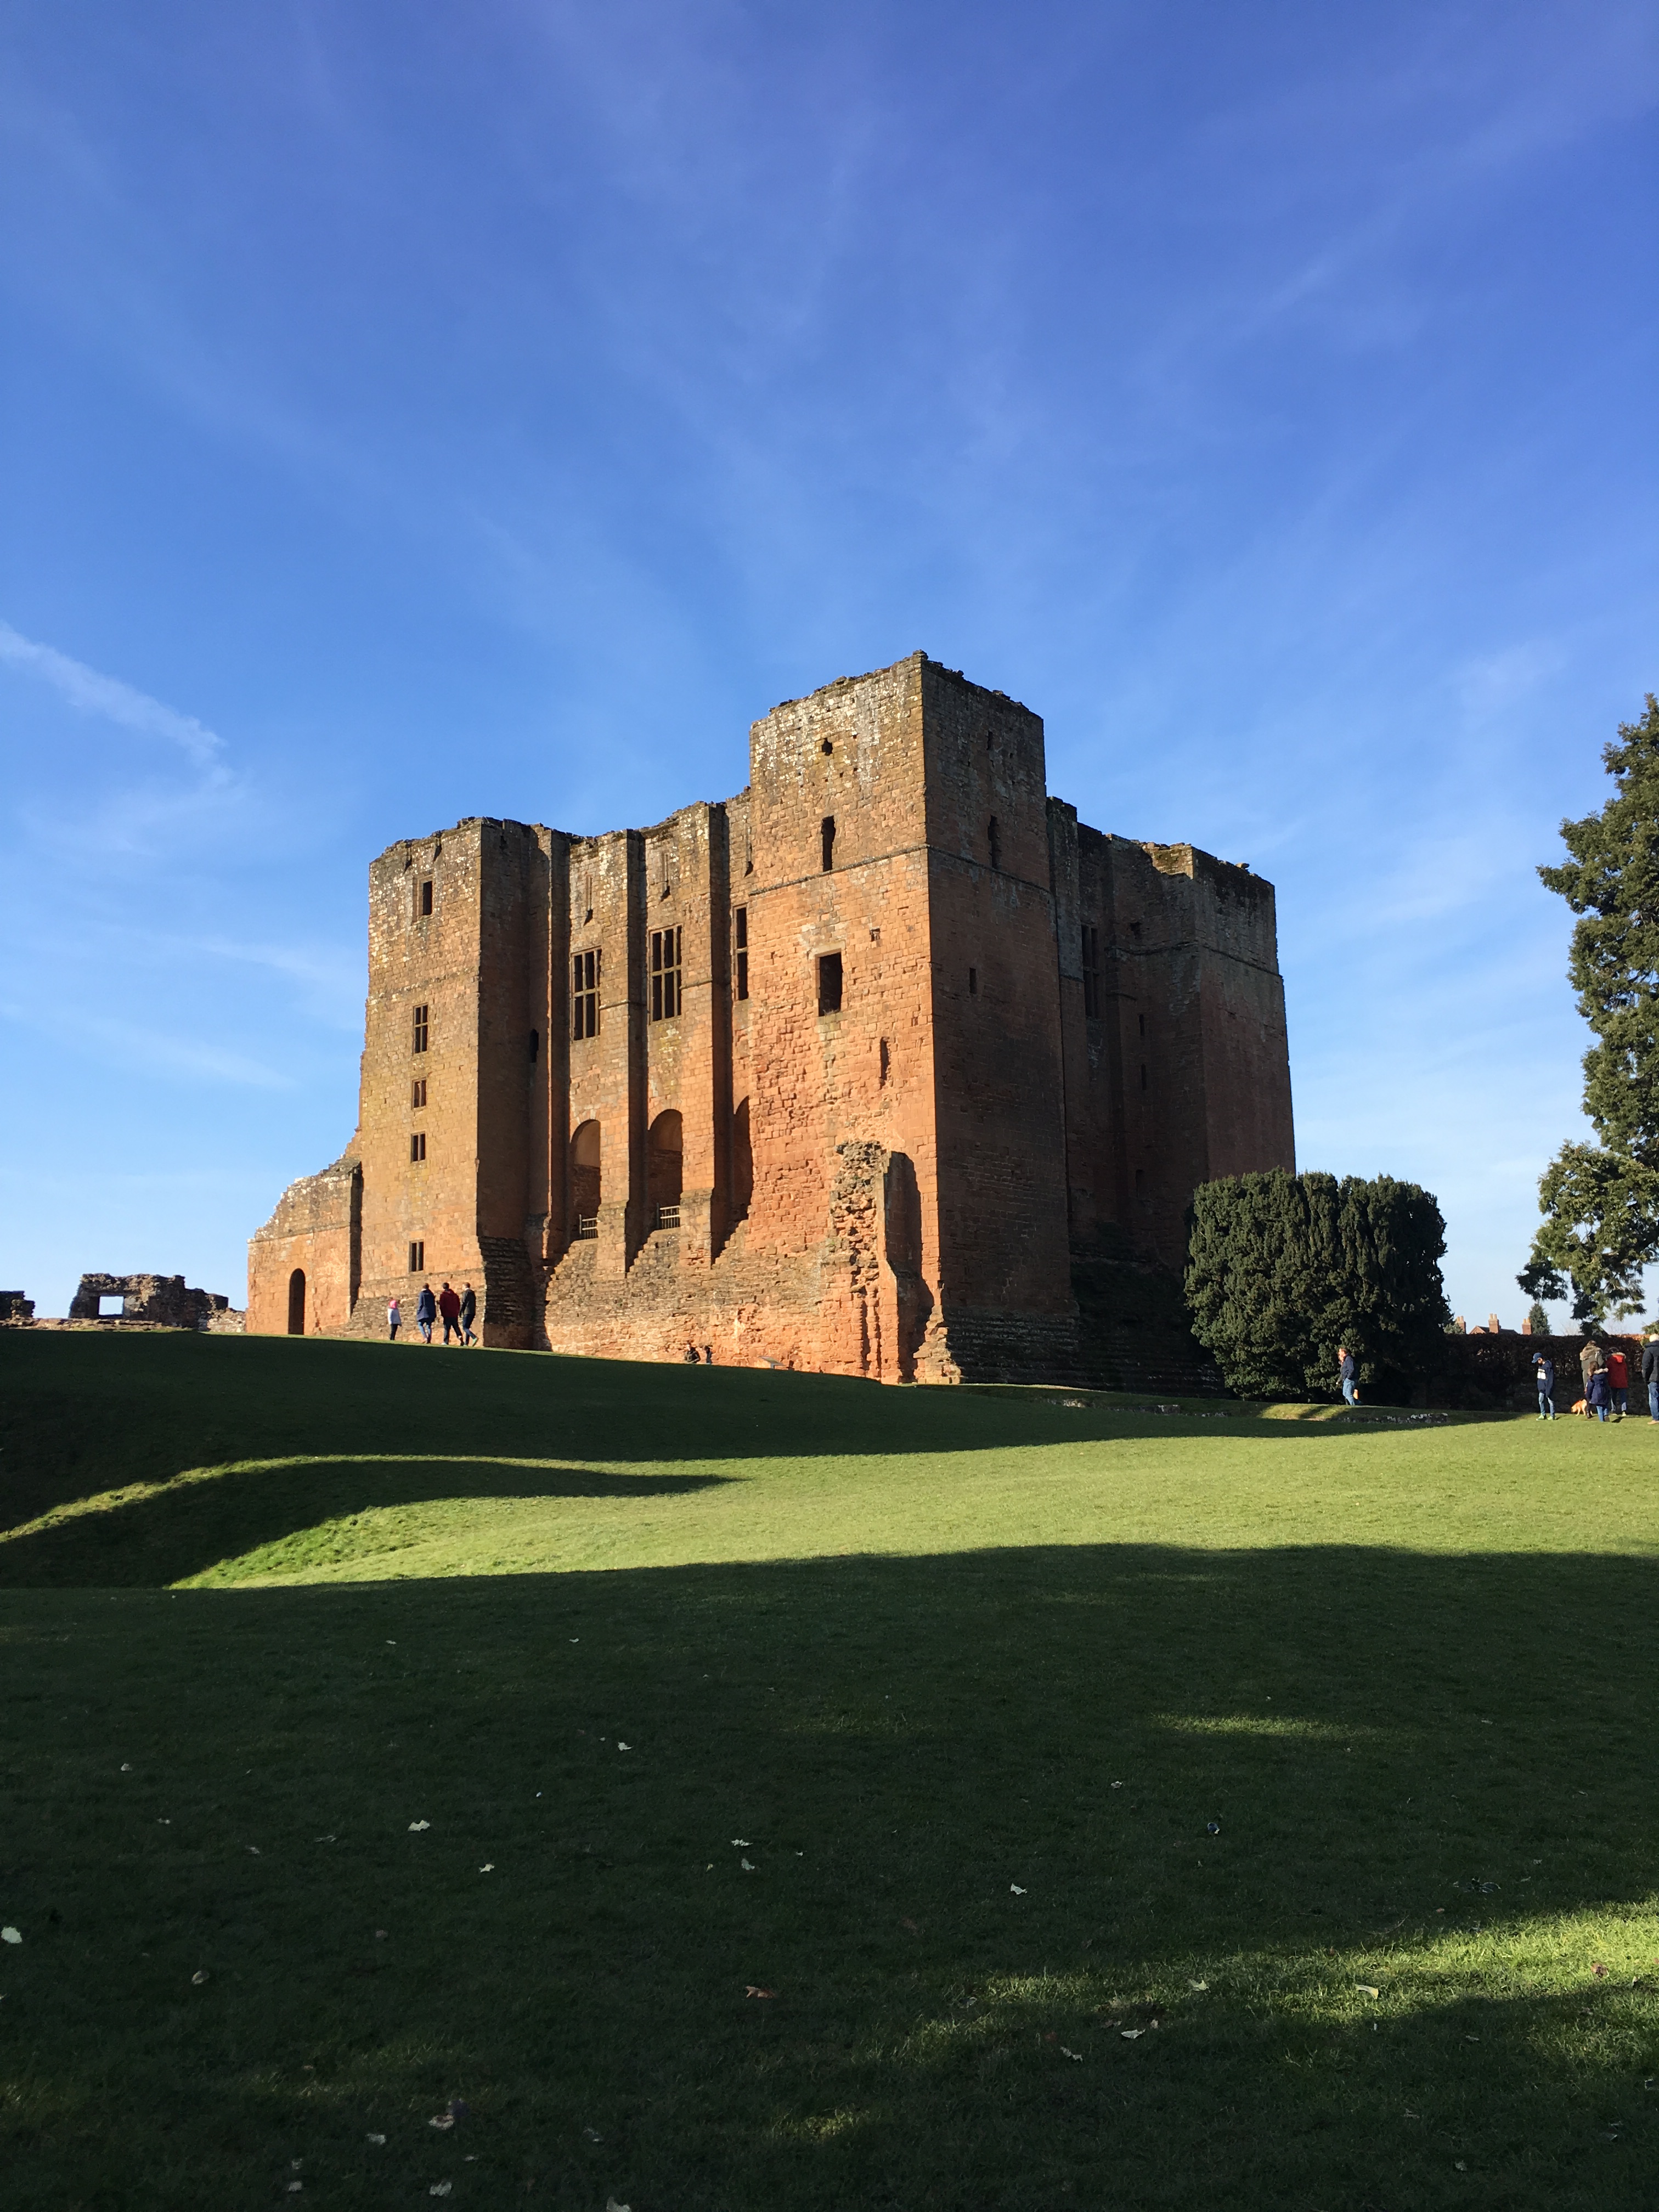 The Norman Keep at Kenilworth Castle